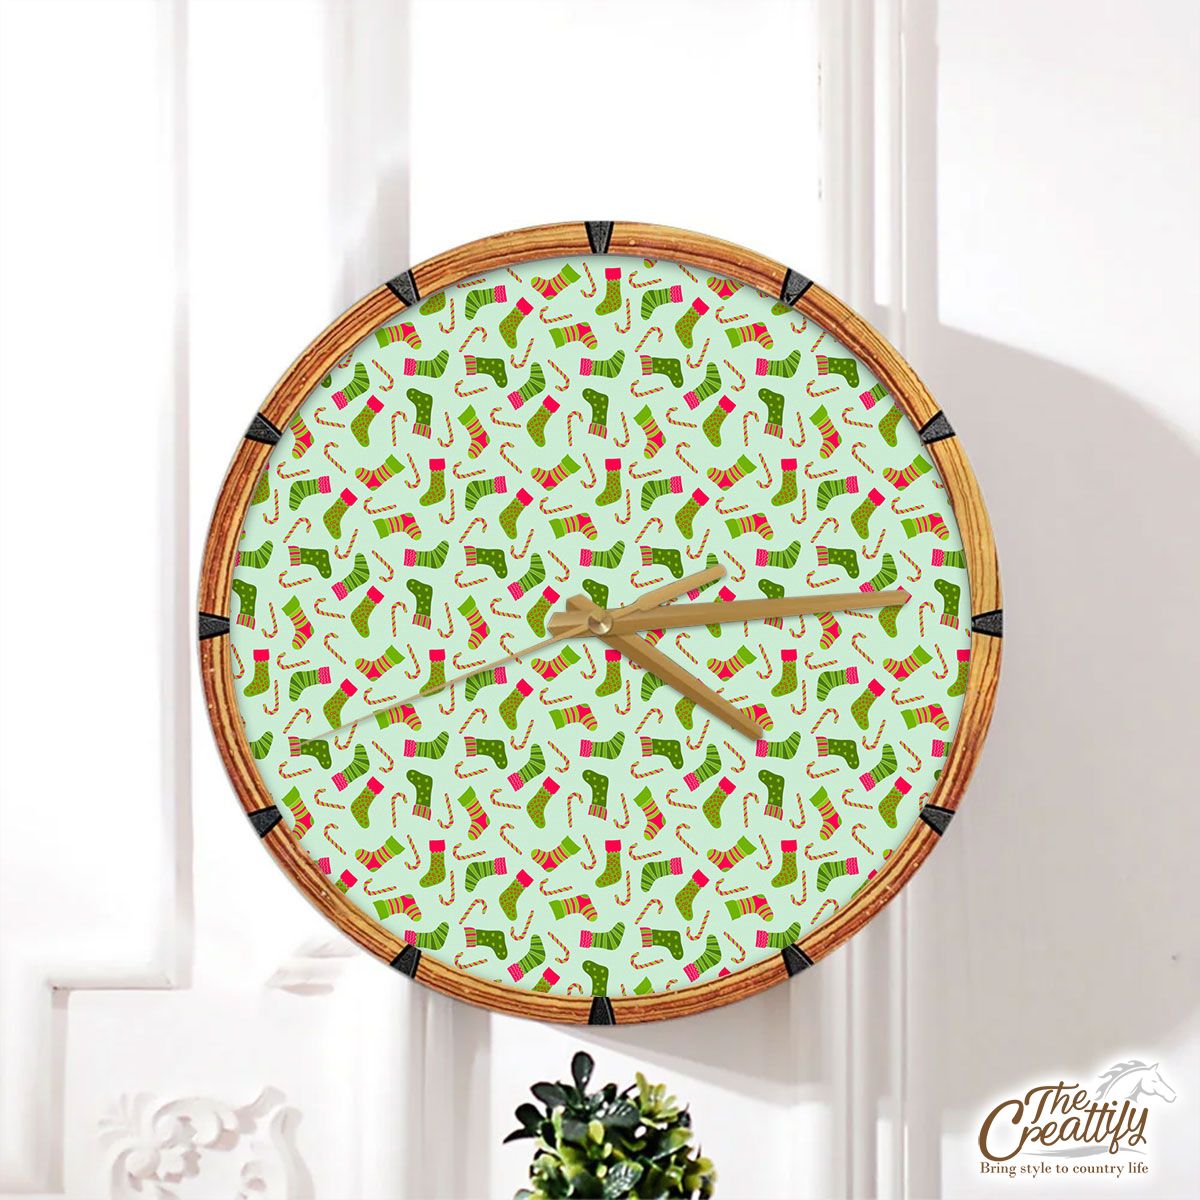 Christmas Socks, Colorful Socks And Candy Canes Wall Clock